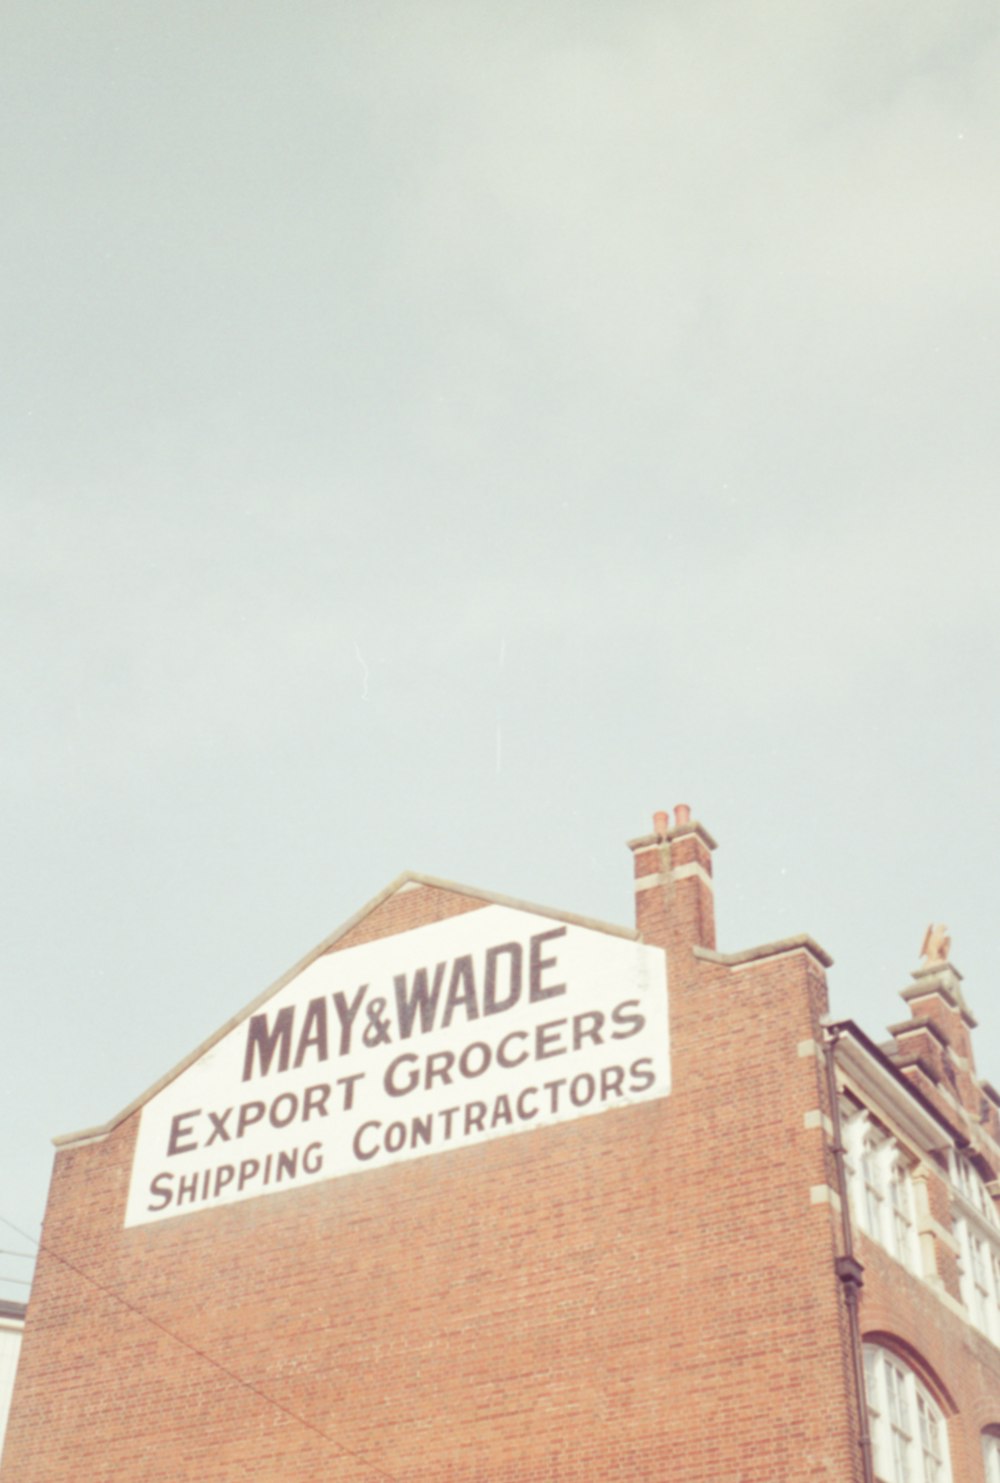 a brick building with a sign that says may and wade